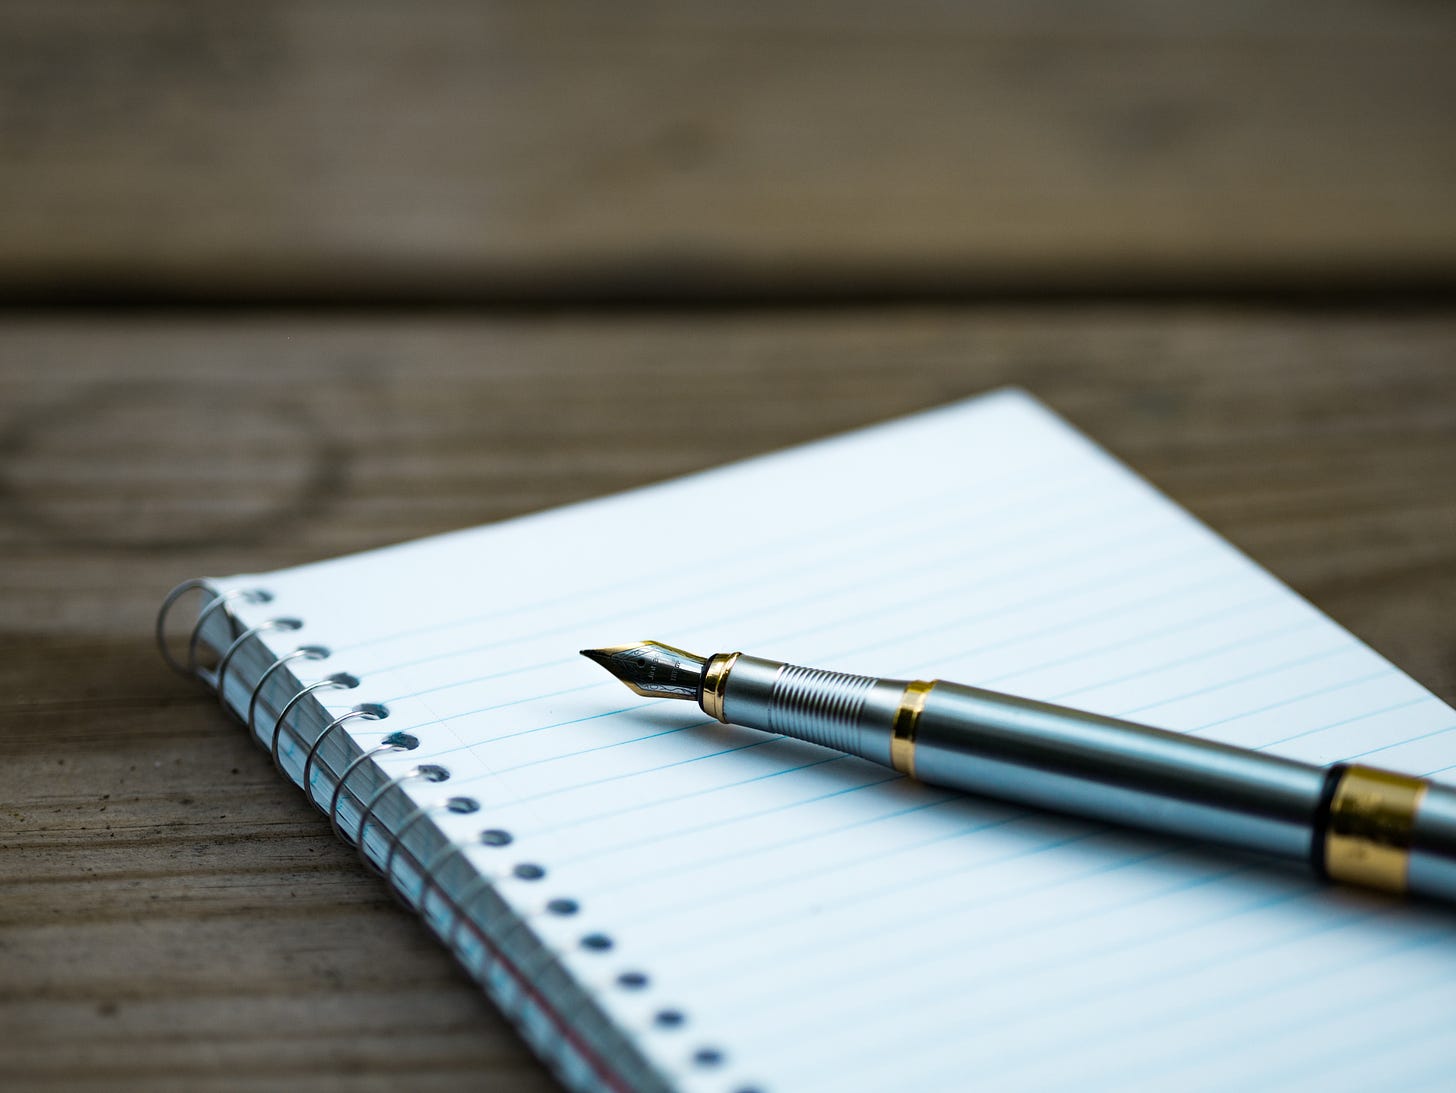 Photograph of a journal with lined paper and a fountain pen